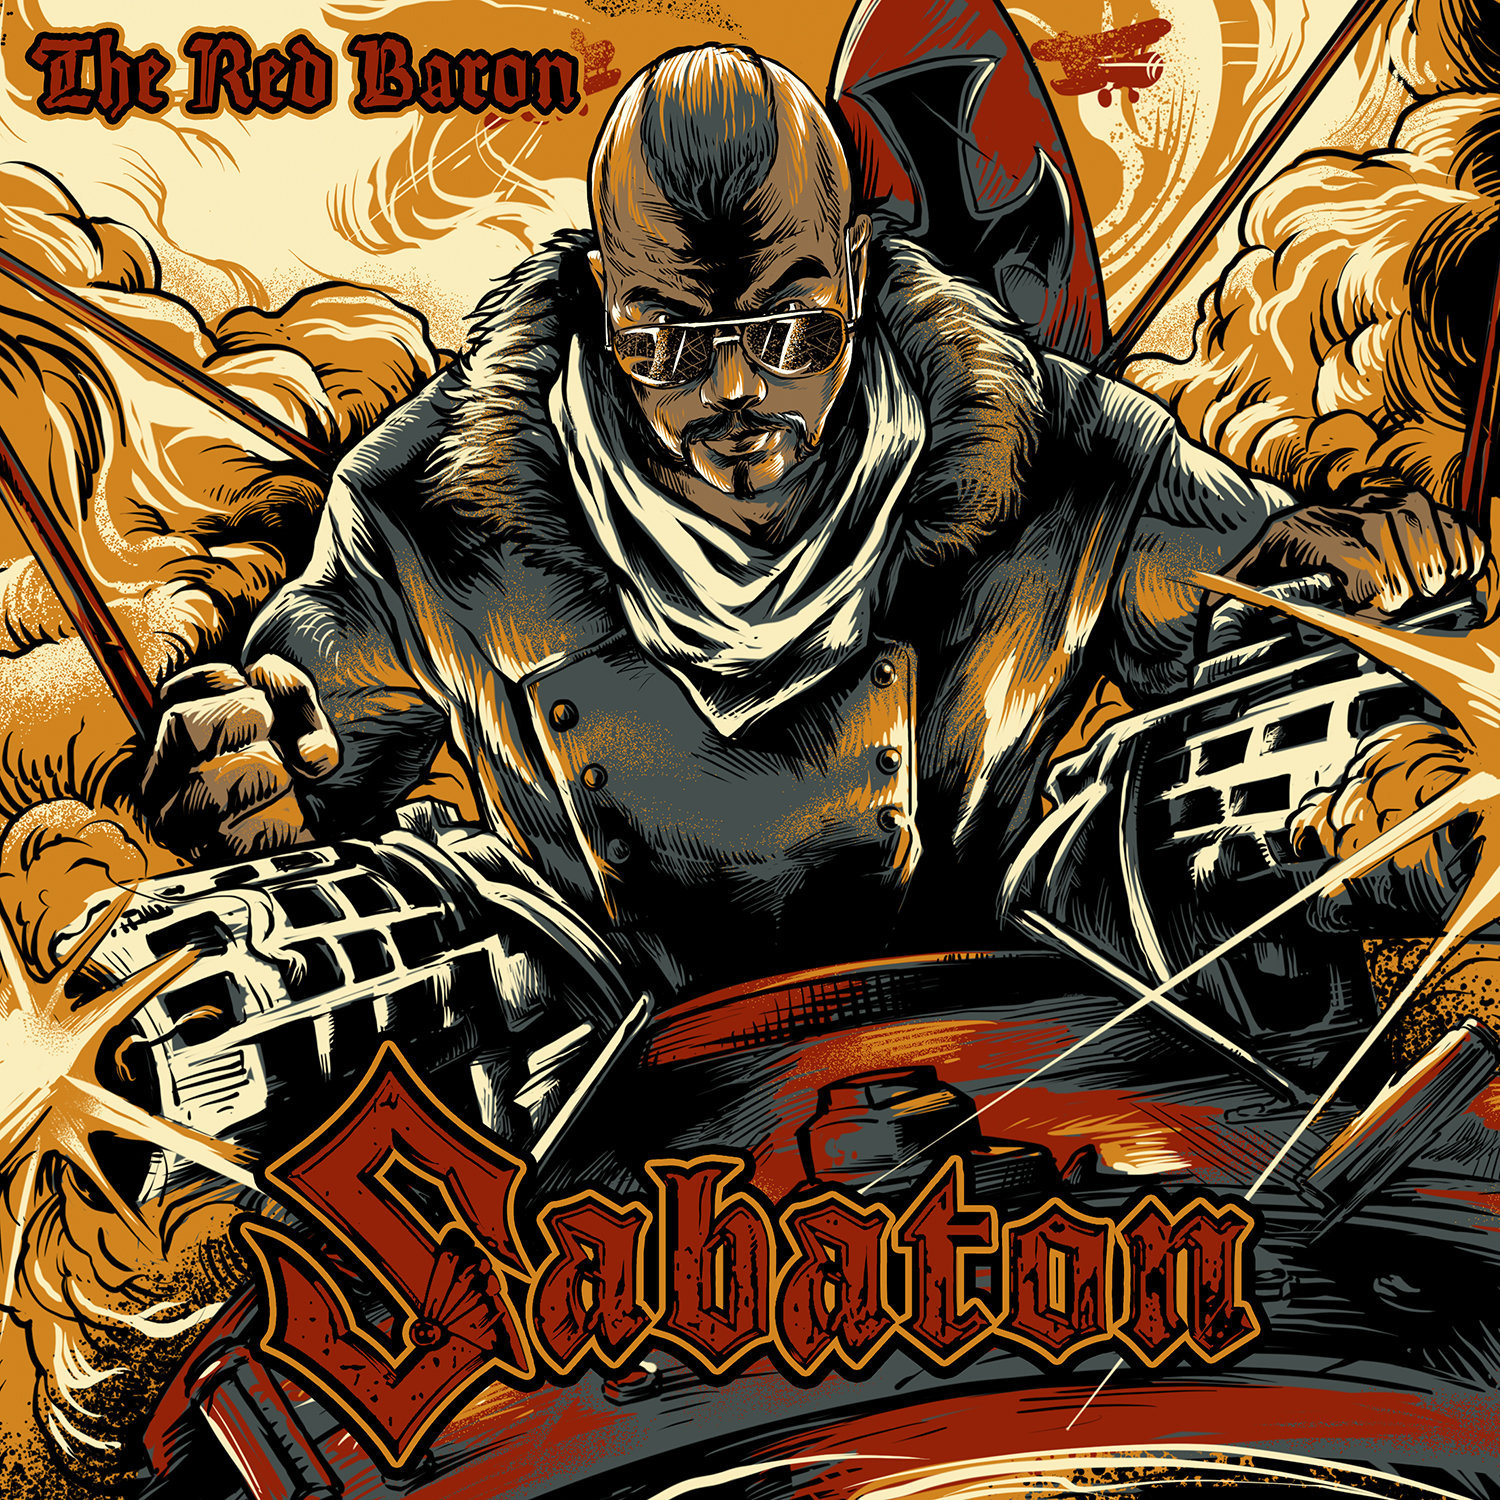 SABATON RELEASES NEW SINGLE/VIDEO "THE RED BARON"